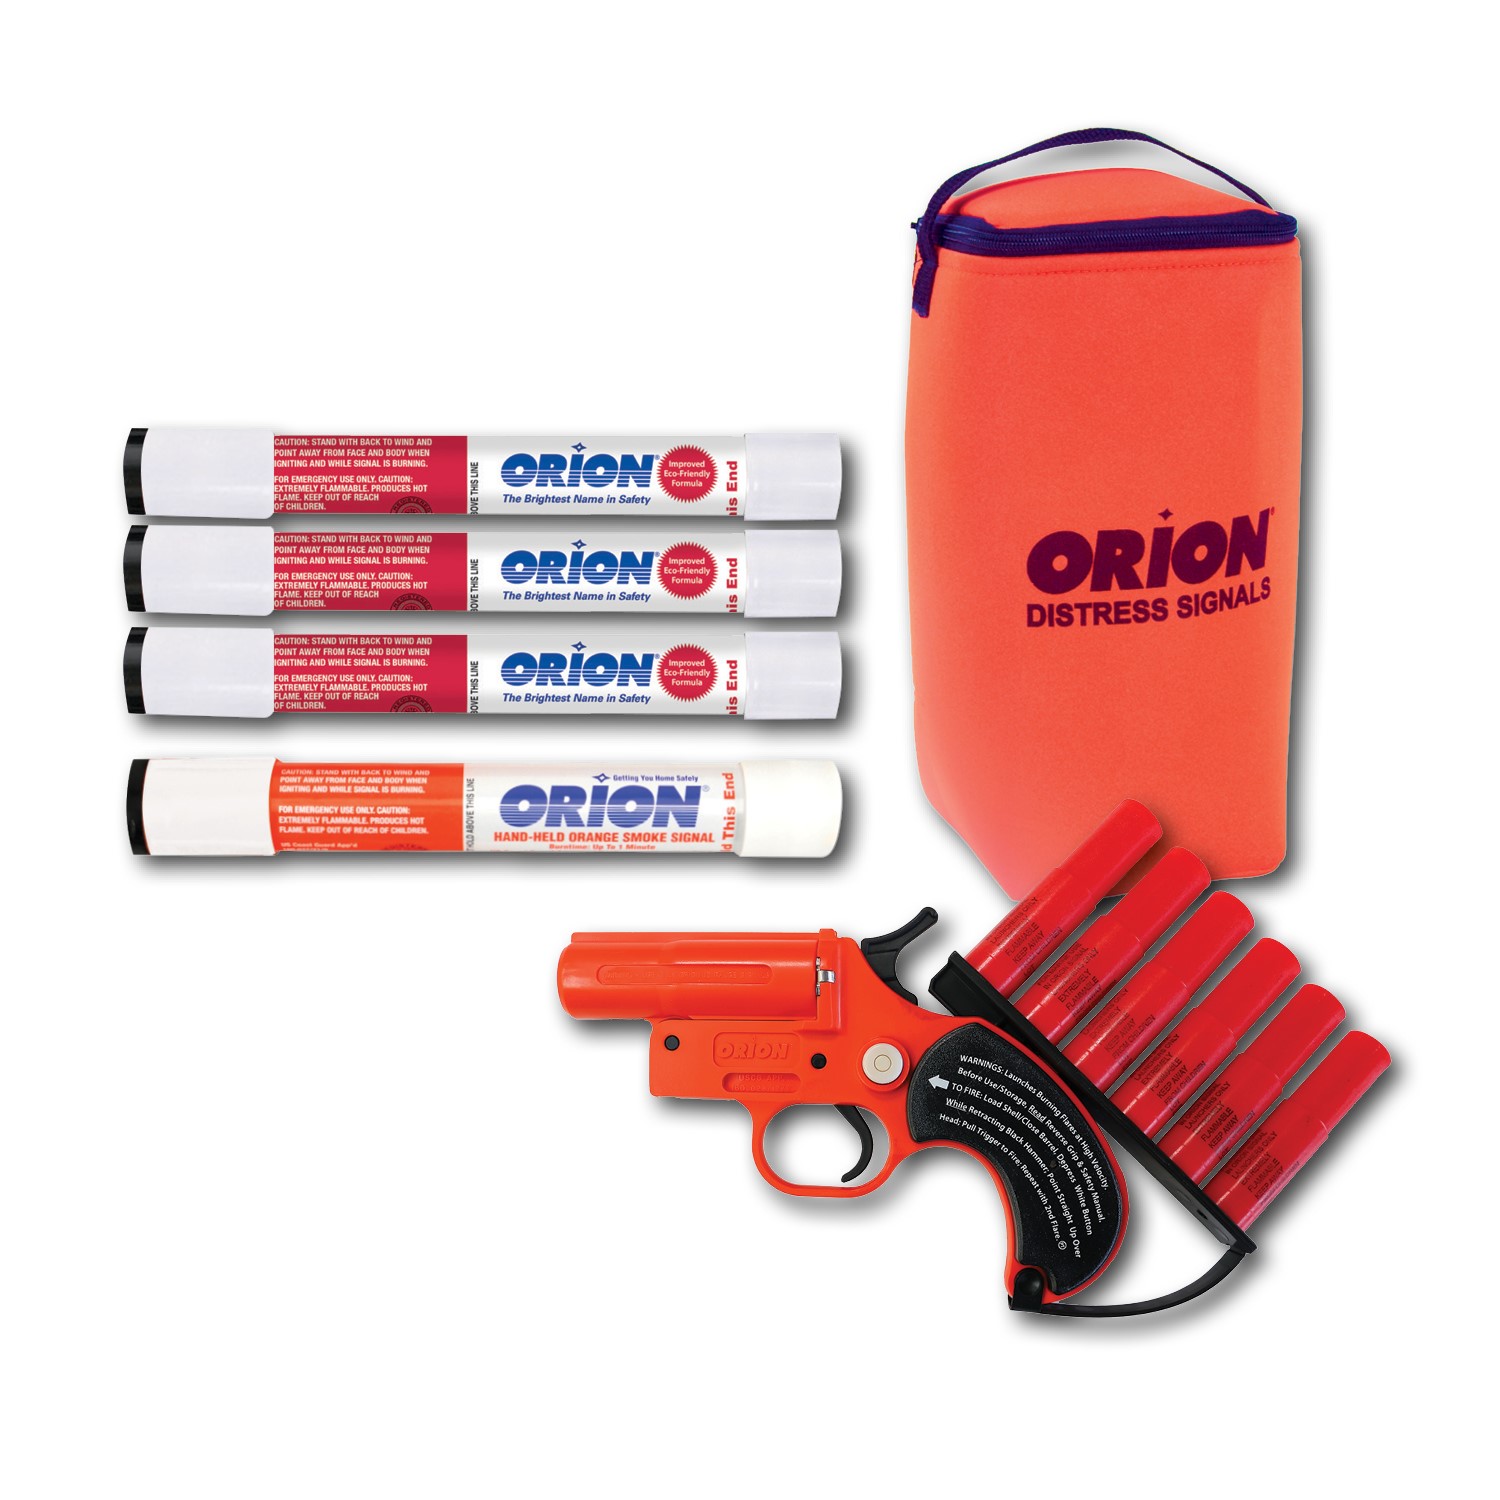 ORION Blue Water Alert Locate Signal Kit